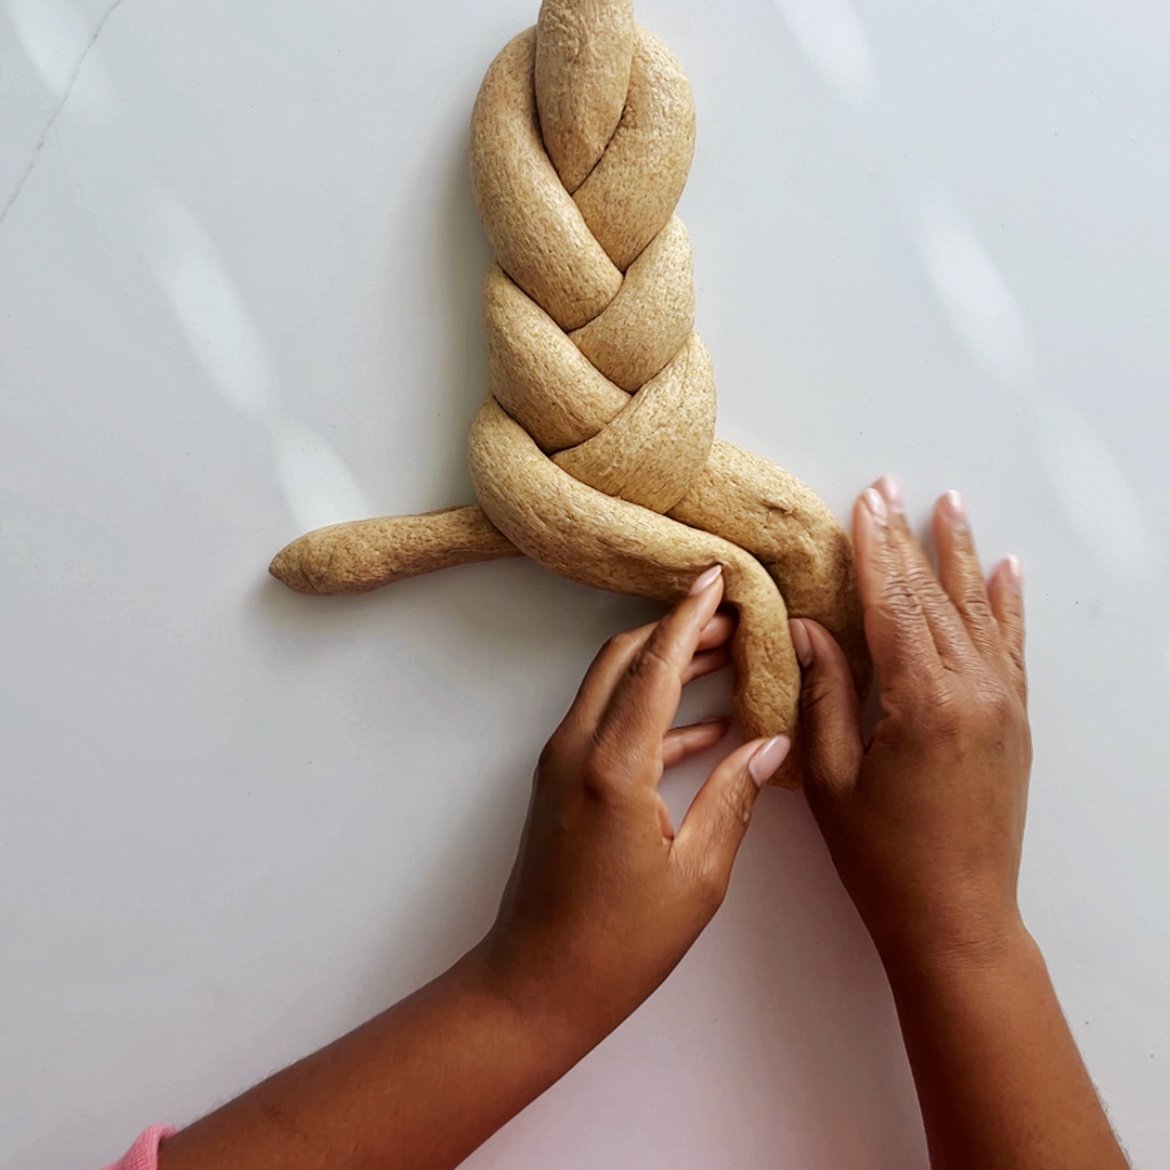 braiding the bread loaf on a white surface